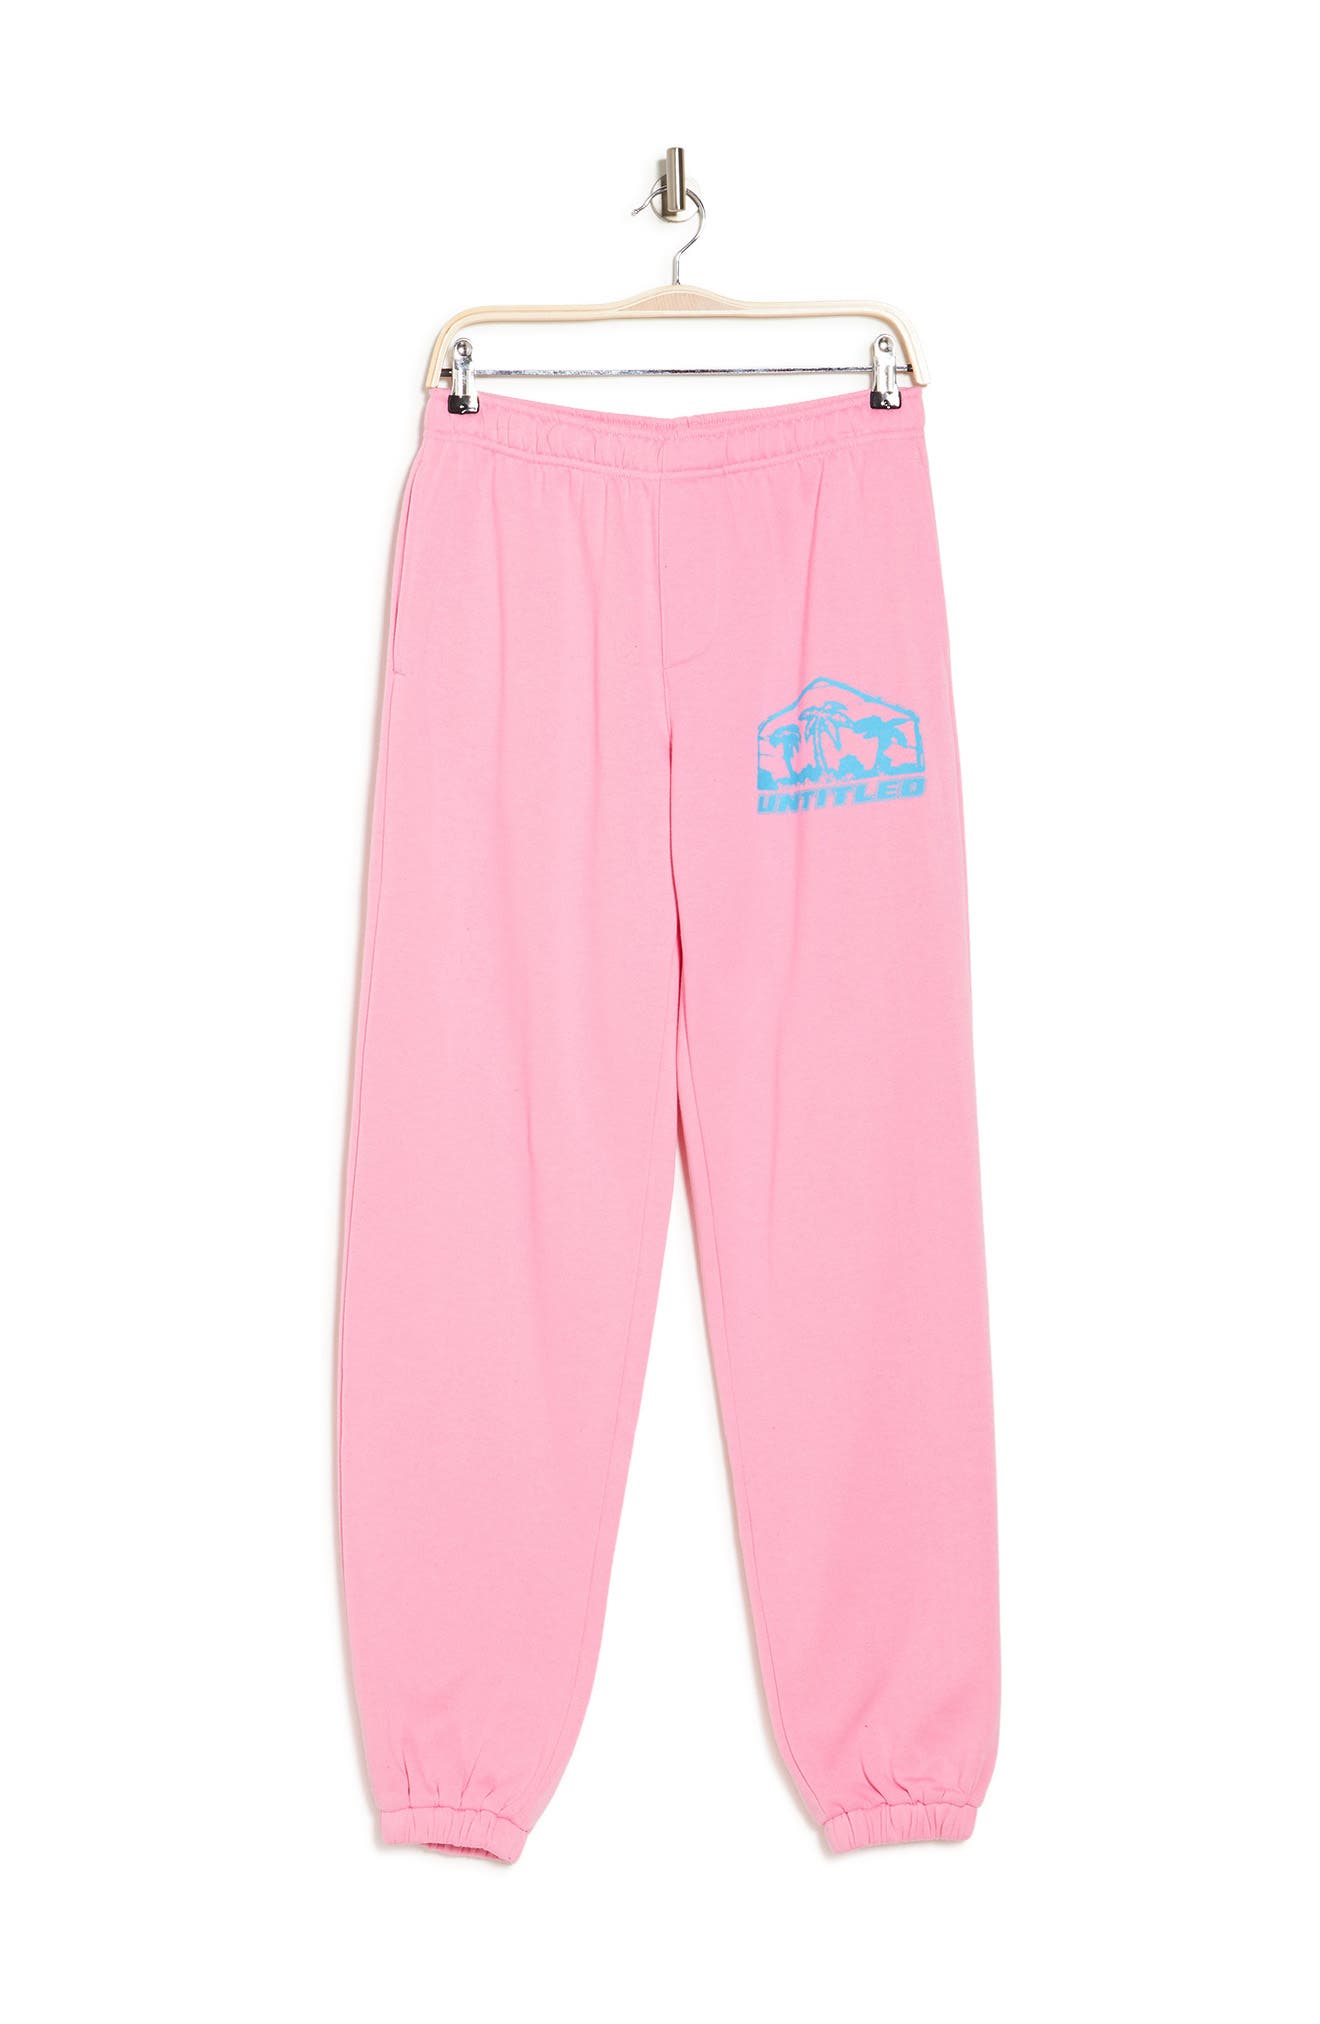 Designs Untitled Simple Untitled Sweatpants In Pink